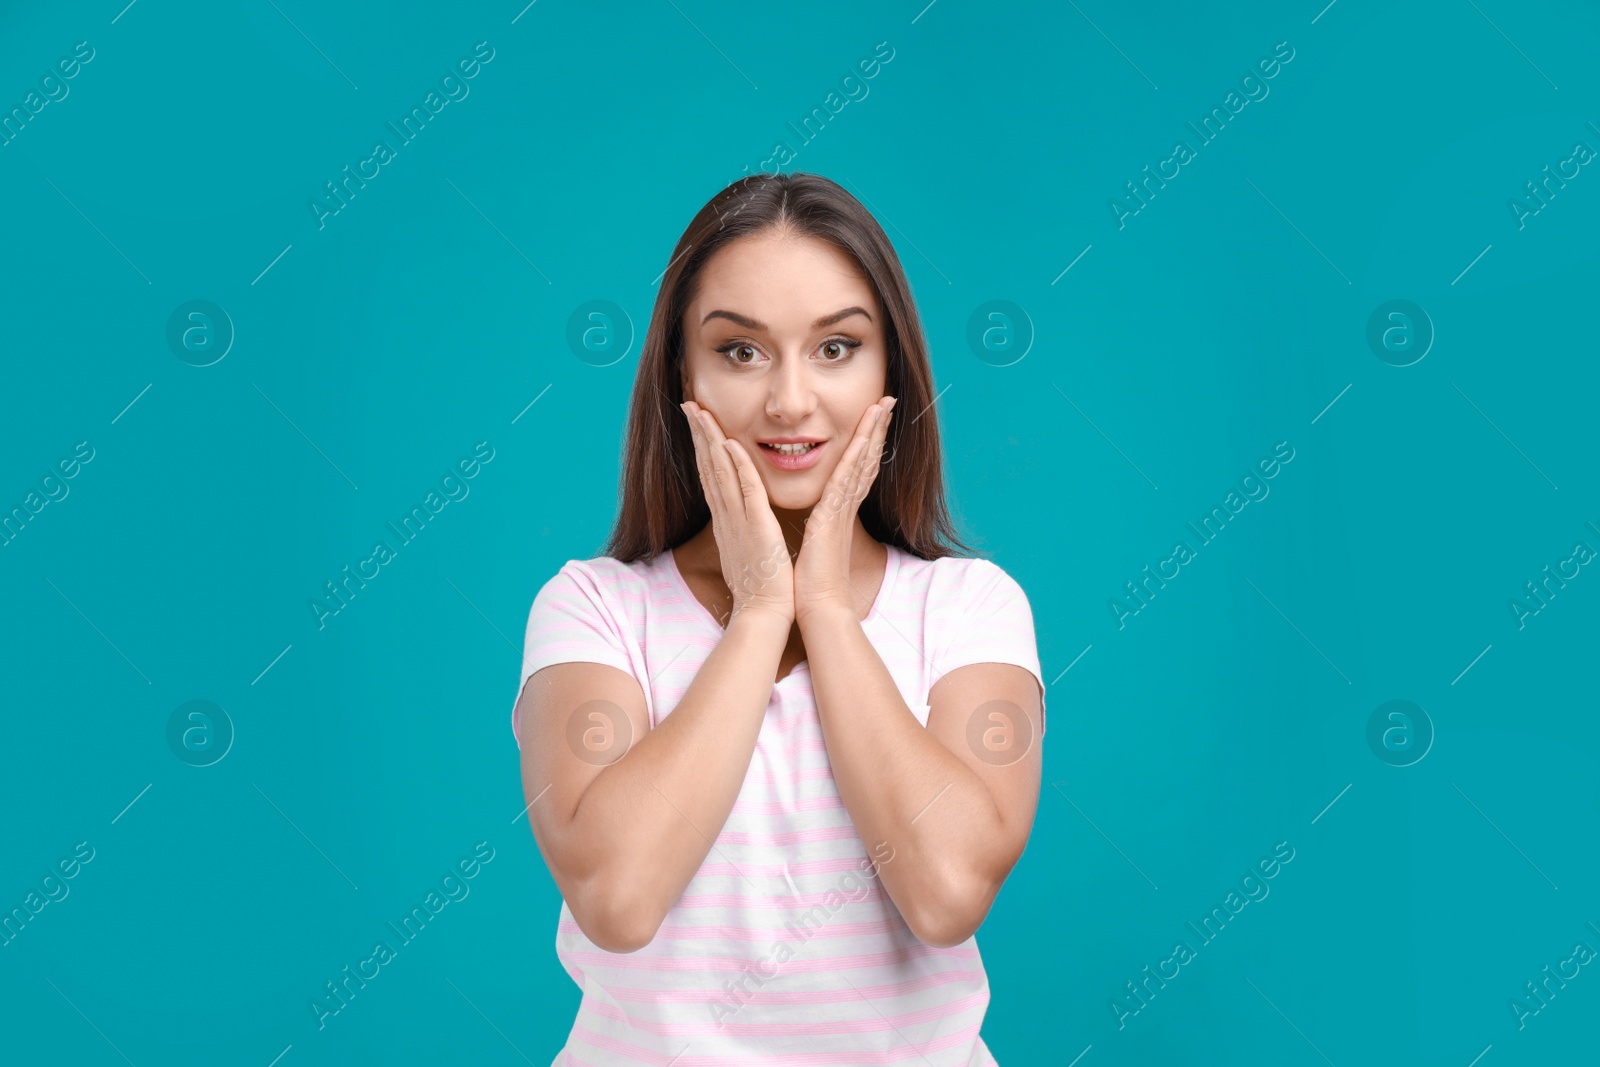 Photo of Emotional young woman in casual outfit on turquoise background